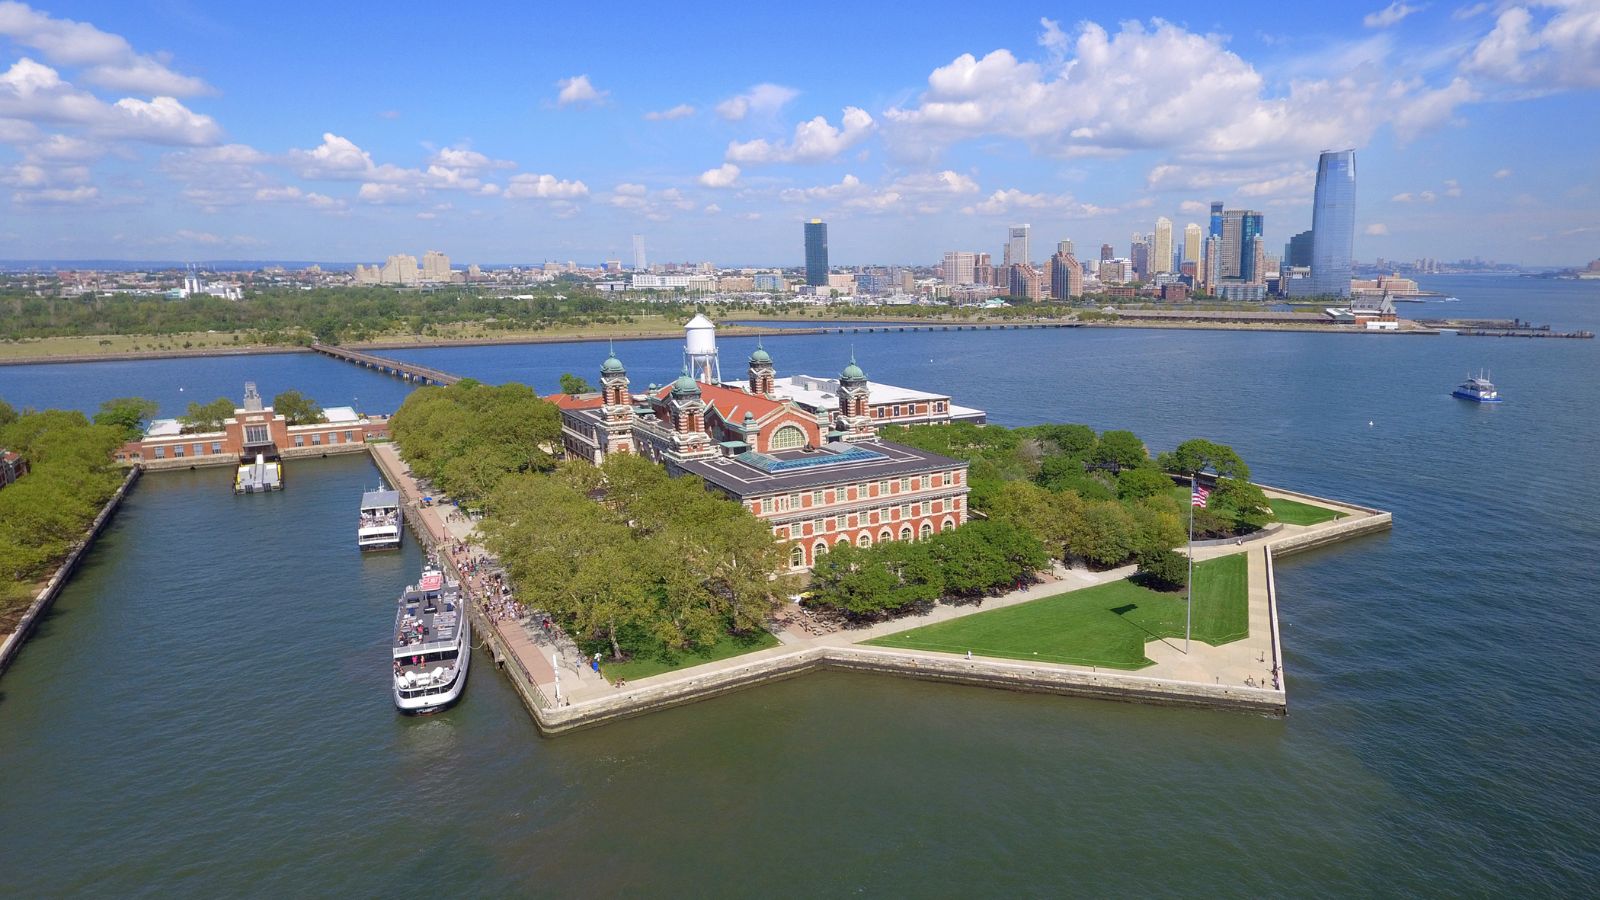 <p>Recommended by 57% of visitors</p><p>From 1892 to 1954, Ellis Island welcomed over 12 million immigrants. Today, it stands as a museum, reflecting the diverse immigrant history of New York City. It is located in New York Harbor and is accessible by ferry from Battery Park City or New Jersey. The museum offers various tours, including self-paced audio tours in multiple languages, ranger-guided tours, and a free Ferry Building tour. These tours provide a glimpse into the experiences of those who journeyed to America, making Ellis Island a significant landmark in the nation’s history.</p>